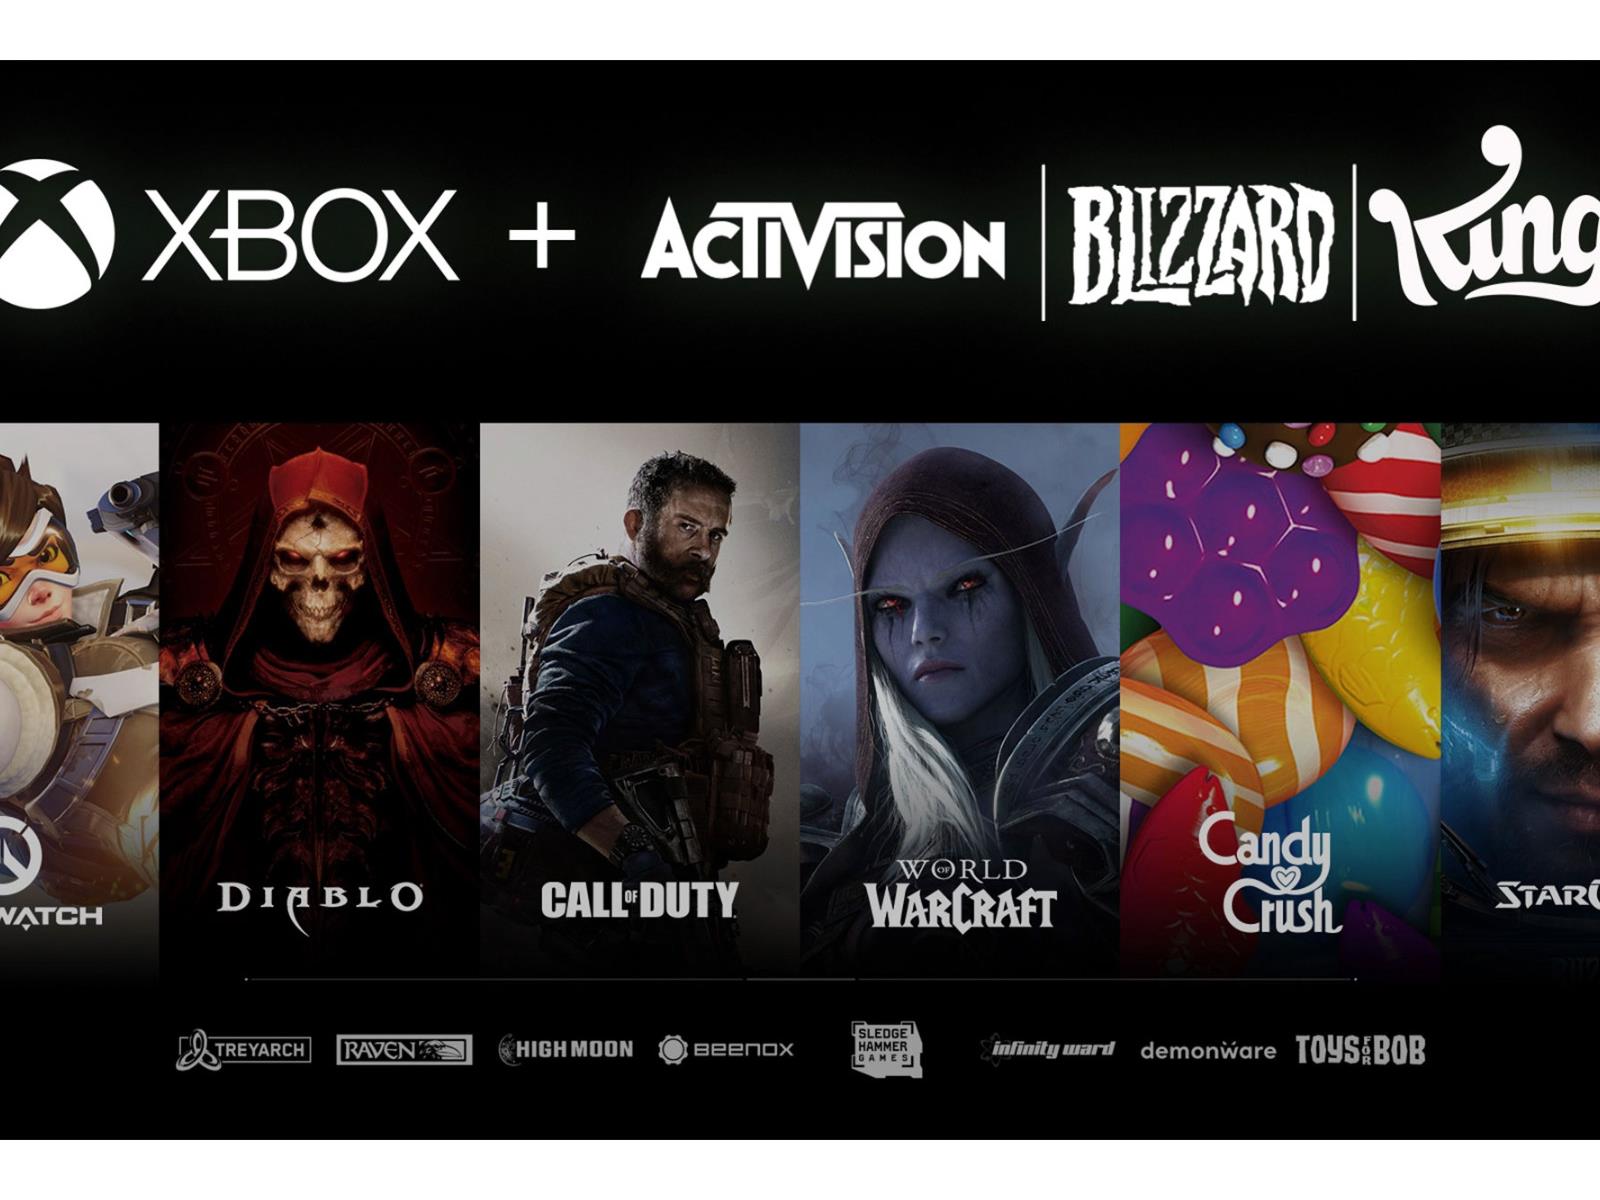 Microsoft to Buy Activision Blizzard in All-Cash Deal Valued at